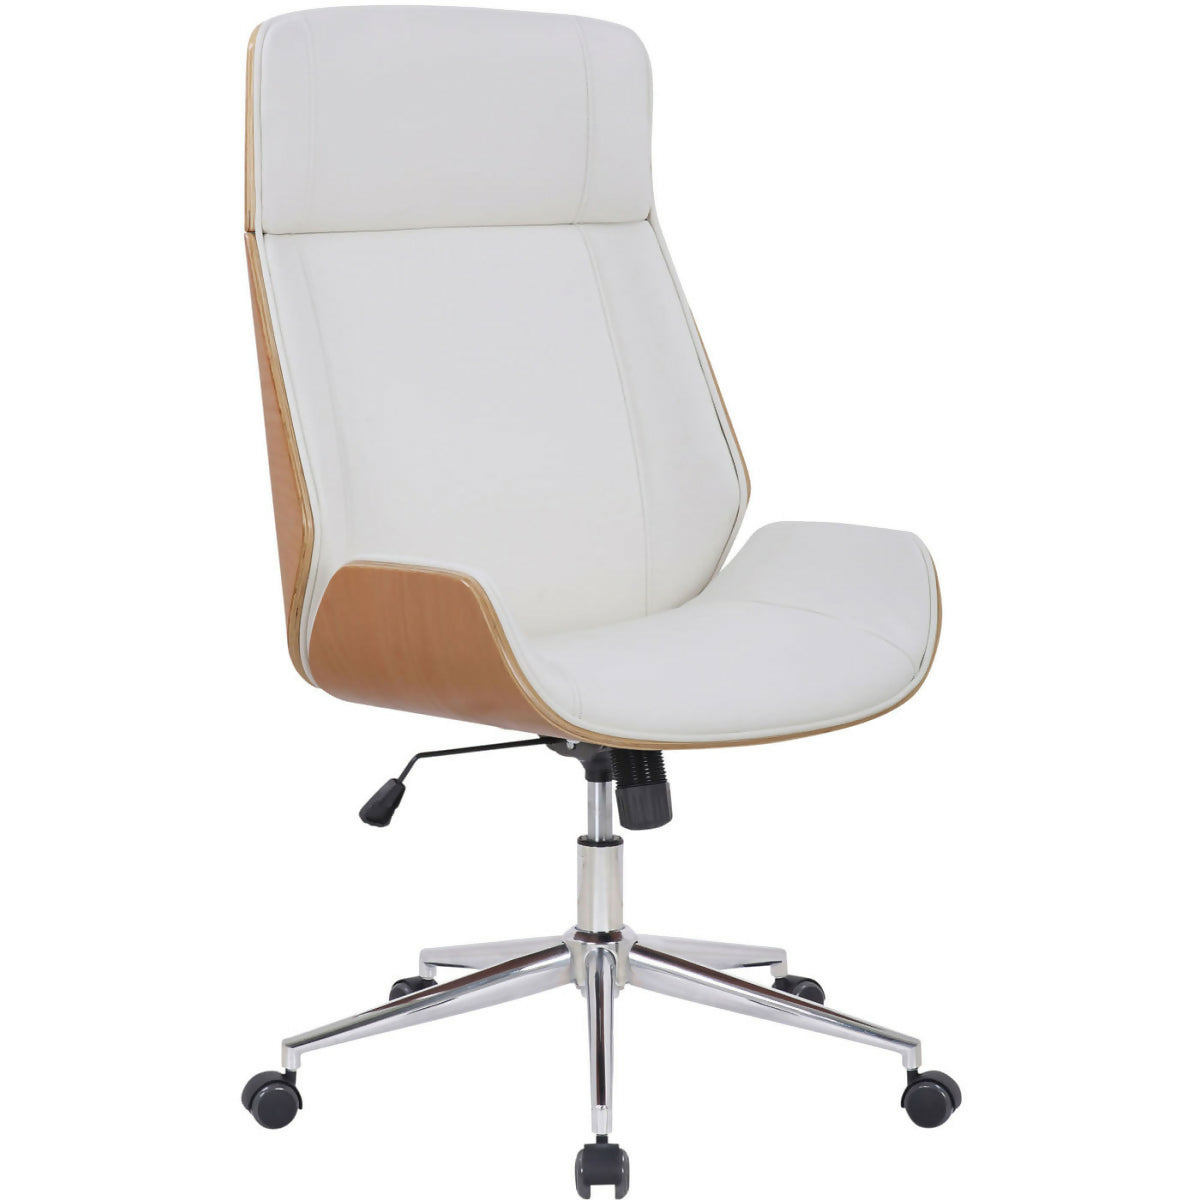 Varel office armchair - Natural wood - white